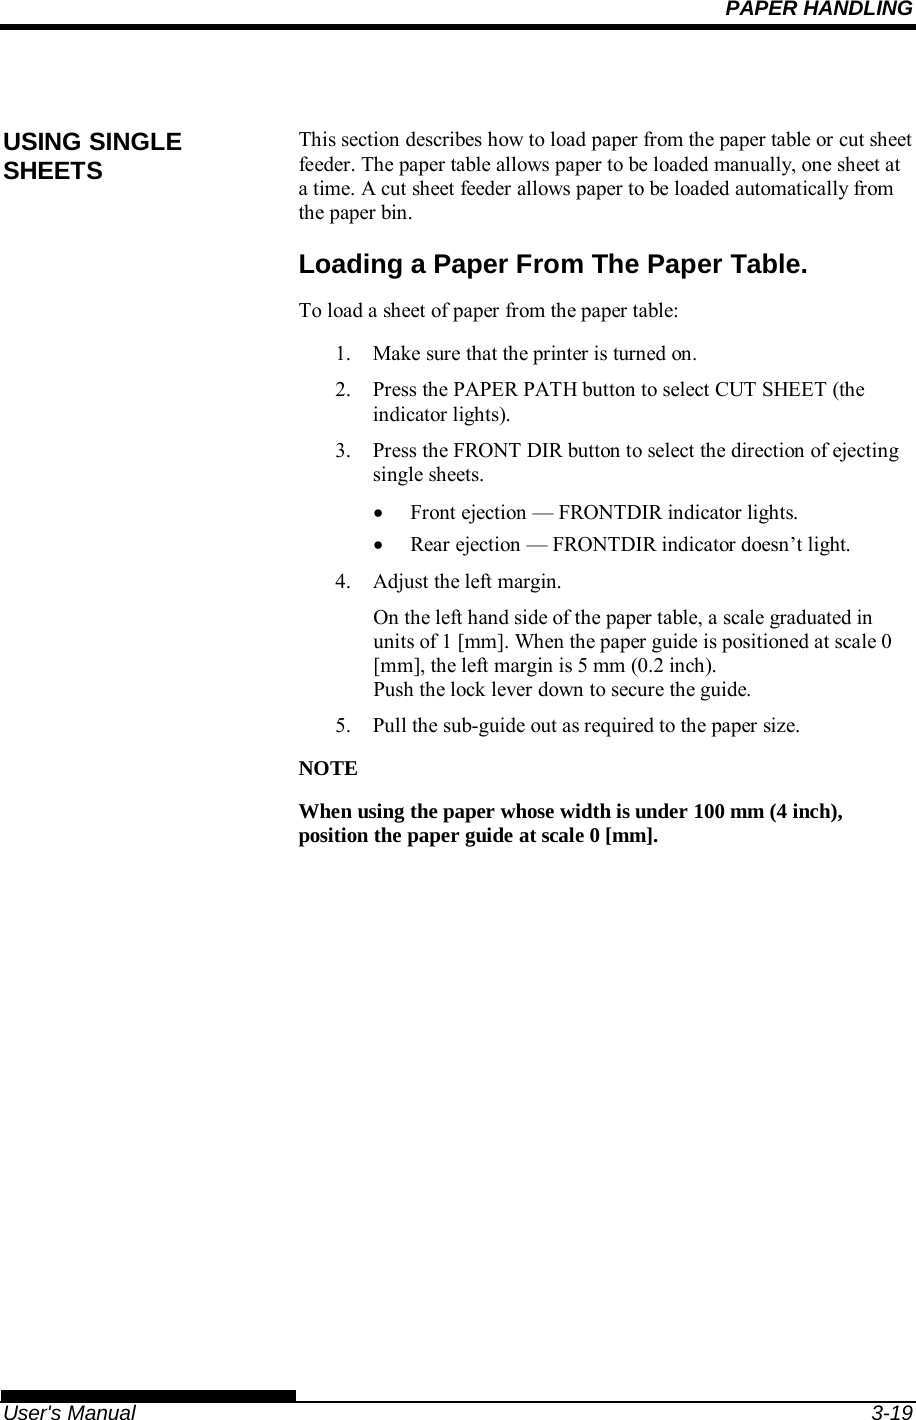 PAPER HANDLING   User&apos;s Manual  3-19  This section describes how to load paper from the paper table or cut sheet feeder. The paper table allows paper to be loaded manually, one sheet at a time. A cut sheet feeder allows paper to be loaded automatically from the paper bin. Loading a Paper From The Paper Table. To load a sheet of paper from the paper table: 1.  Make sure that the printer is turned on. 2.  Press the PAPER PATH button to select CUT SHEET (the indicator lights). 3.  Press the FRONT DIR button to select the direction of ejecting single sheets.   Front ejection — FRONTDIR indicator lights.   Rear ejection — FRONTDIR indicator doesn’t light. 4.  Adjust the left margin. On the left hand side of the paper table, a scale graduated in units of 1 [mm]. When the paper guide is positioned at scale 0 [mm], the left margin is 5 mm (0.2 inch).  Push the lock lever down to secure the guide. 5.  Pull the sub-guide out as required to the paper size.  NOTE When using the paper whose width is under 100 mm (4 inch), position the paper guide at scale 0 [mm].         USING SINGLE SHEETS 